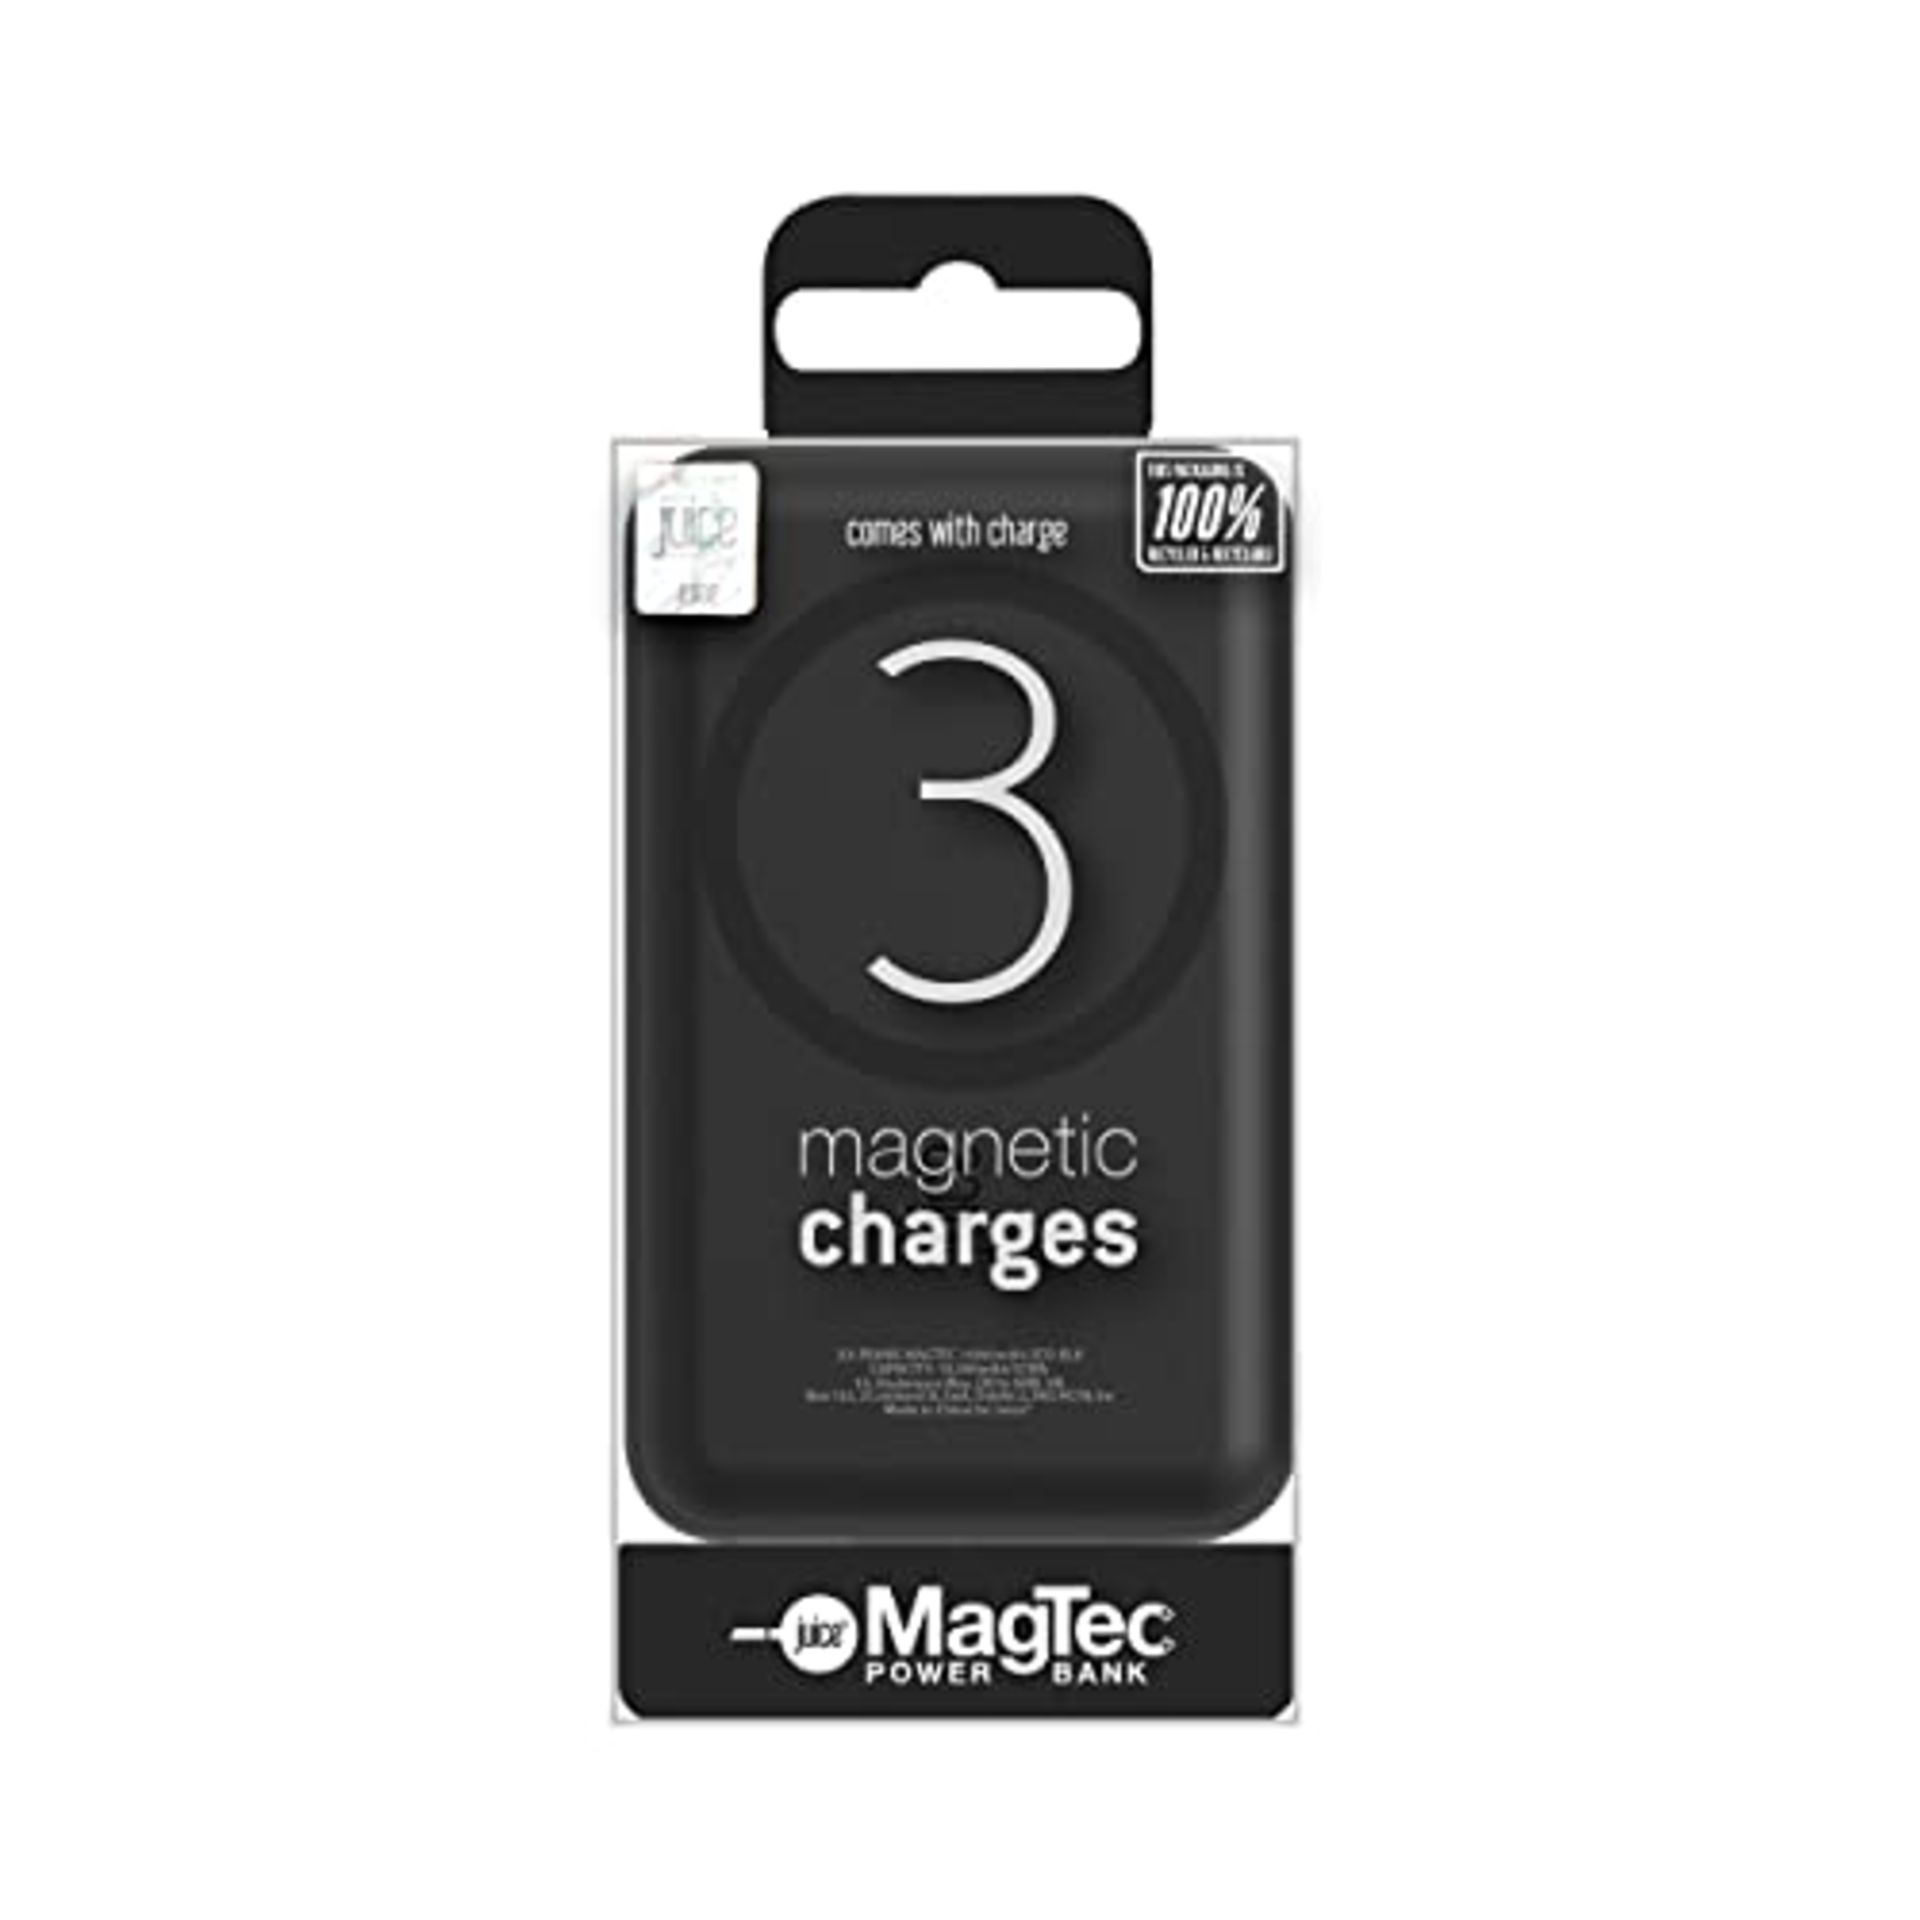 Juice MagTec, 10,000mAh Magnetic Power Bank | Magnetic Wireless Charging Portable Char